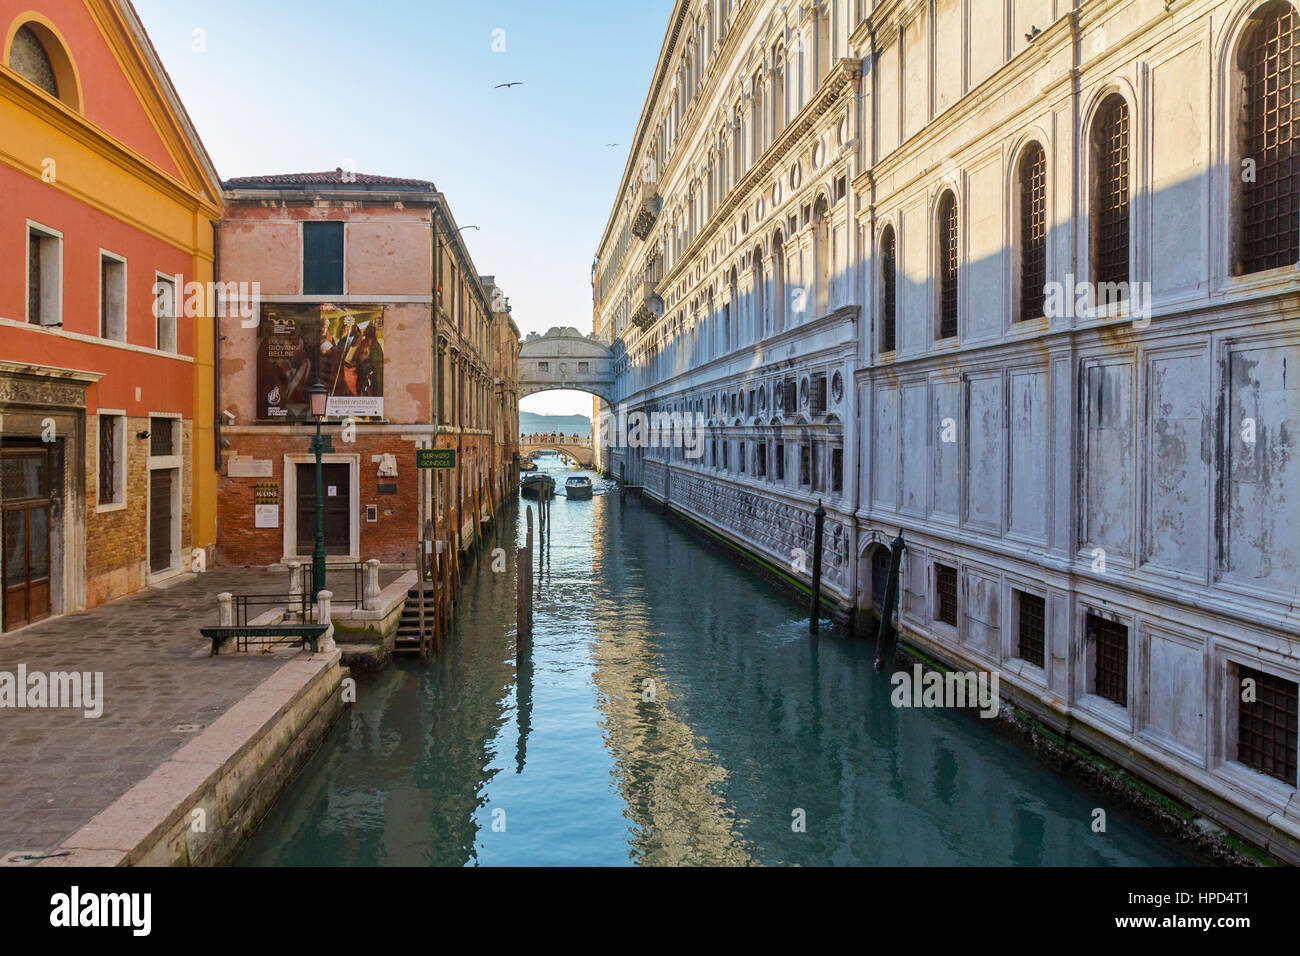 A view of gondolas and the Venice canals in Italy. Stock Photo